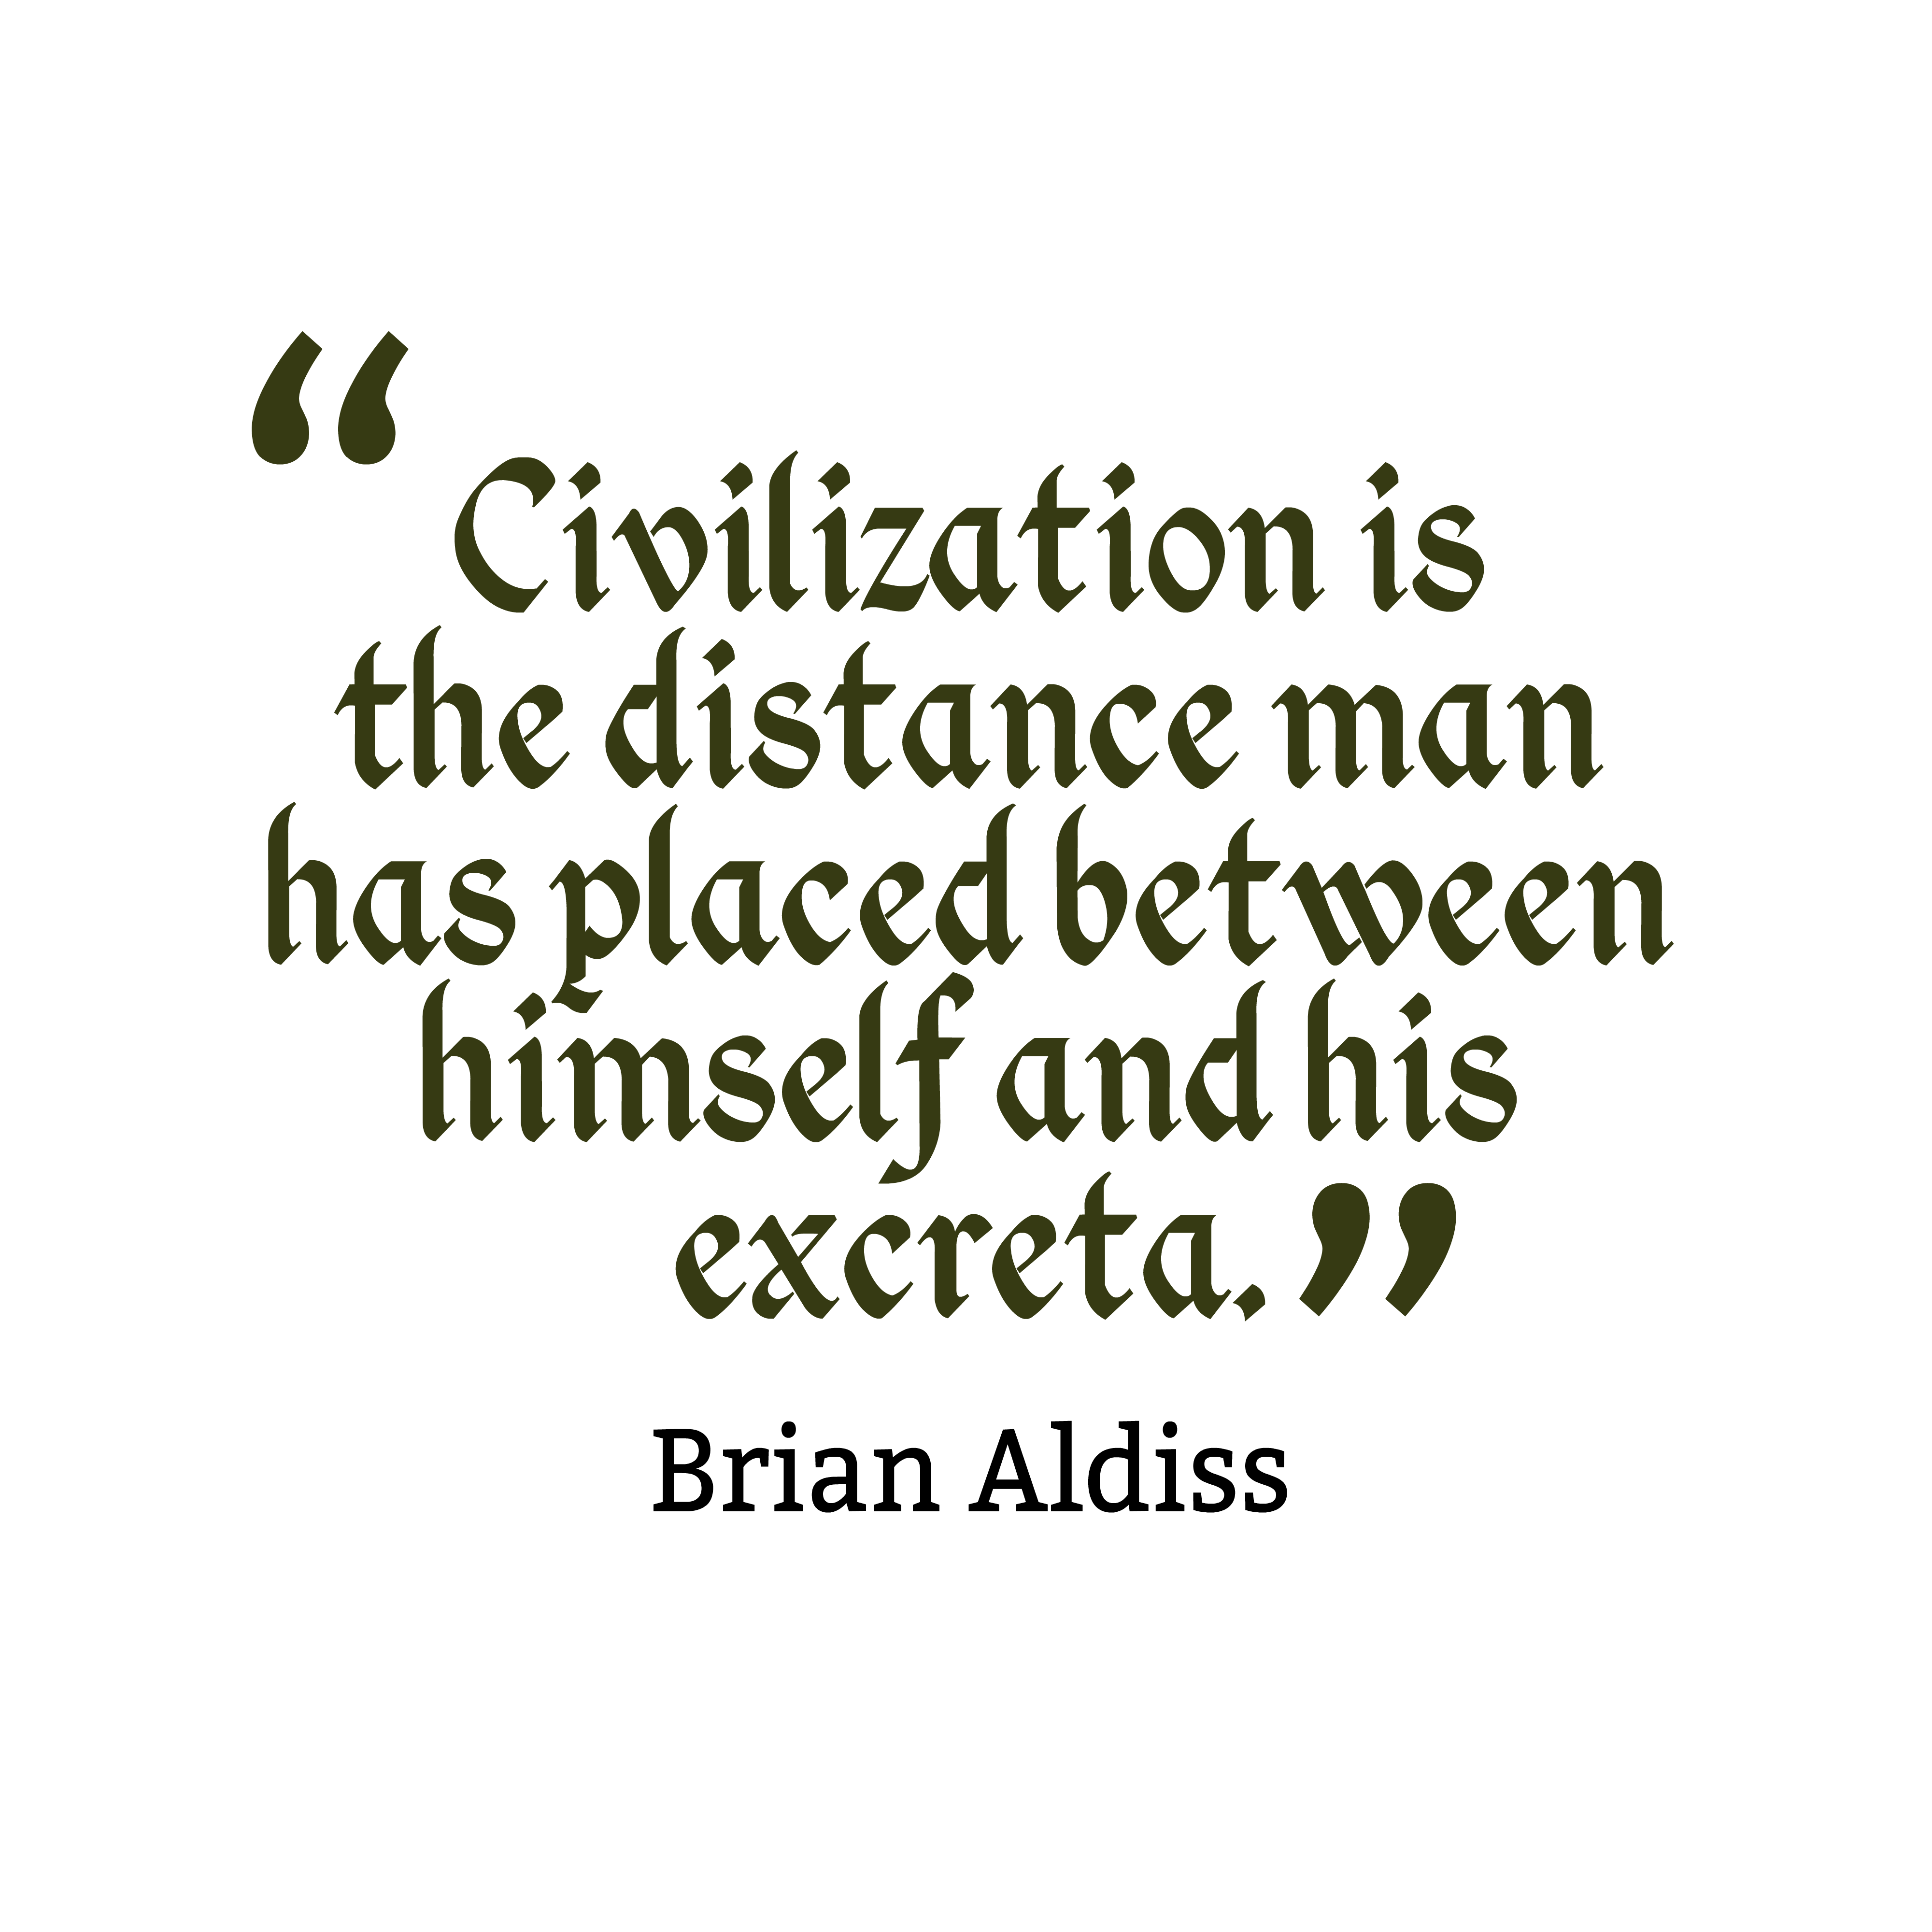 Civilization is the distance man has placed between himself and his excreta. Brian Aldiss